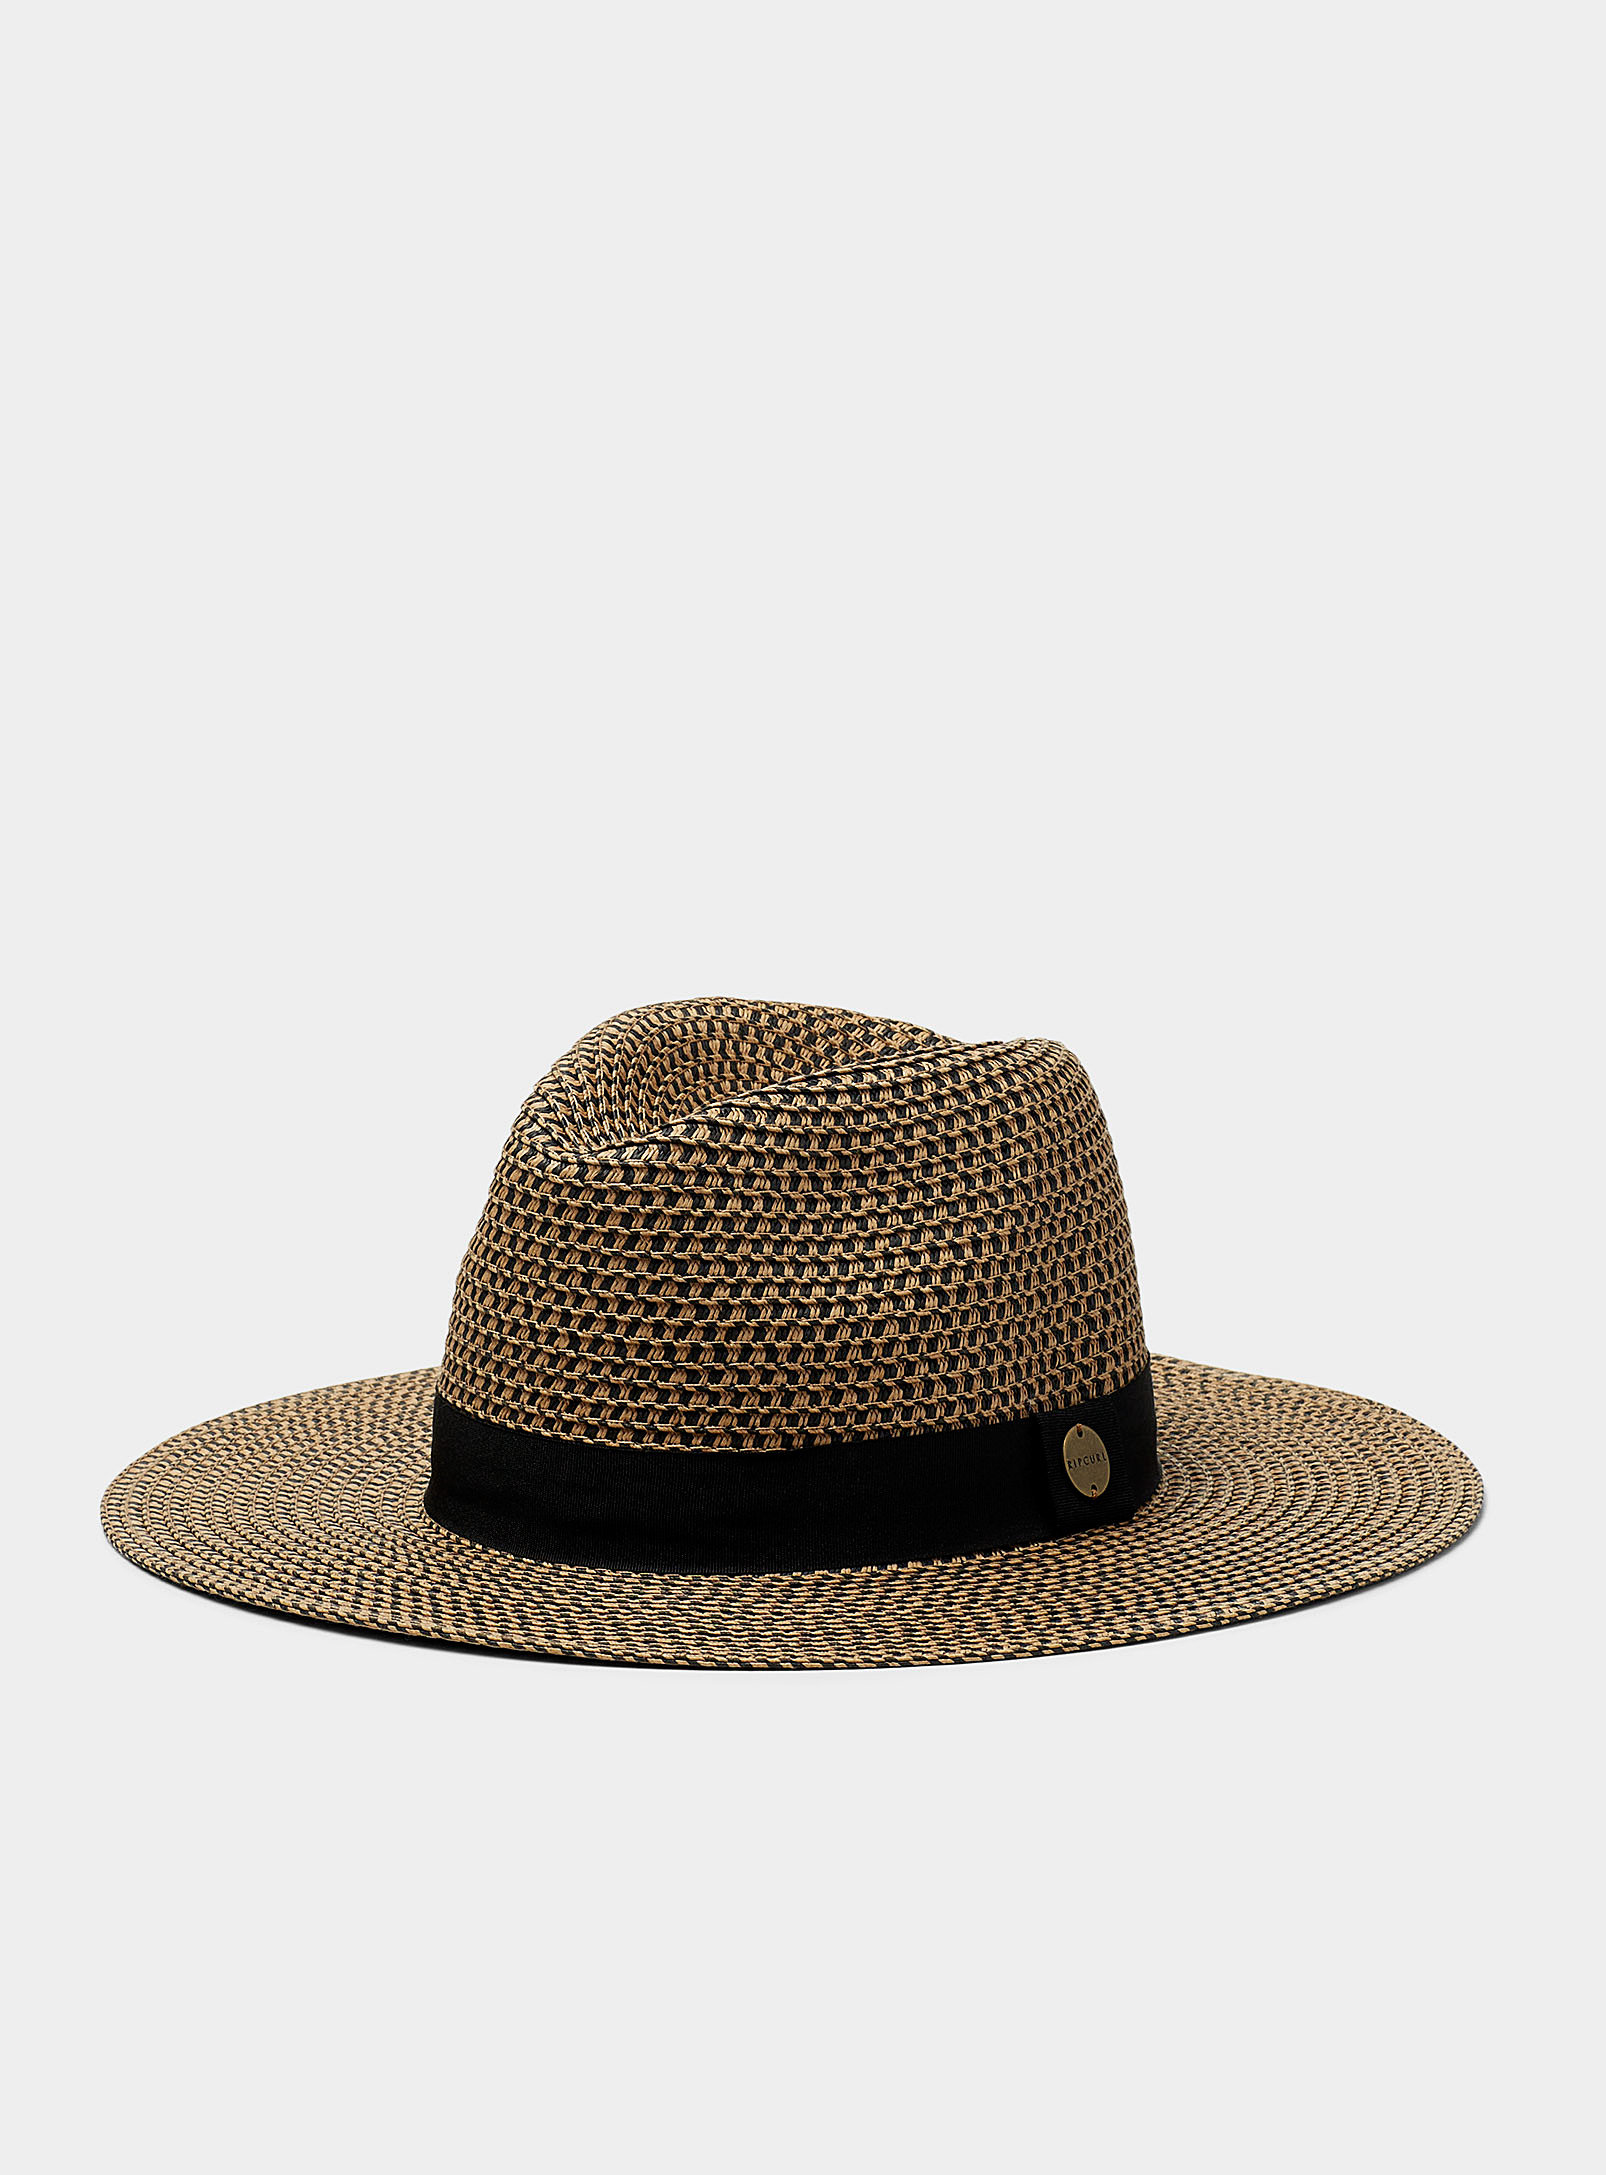 Rip Curl Straw Panama Hat In Patterned Black